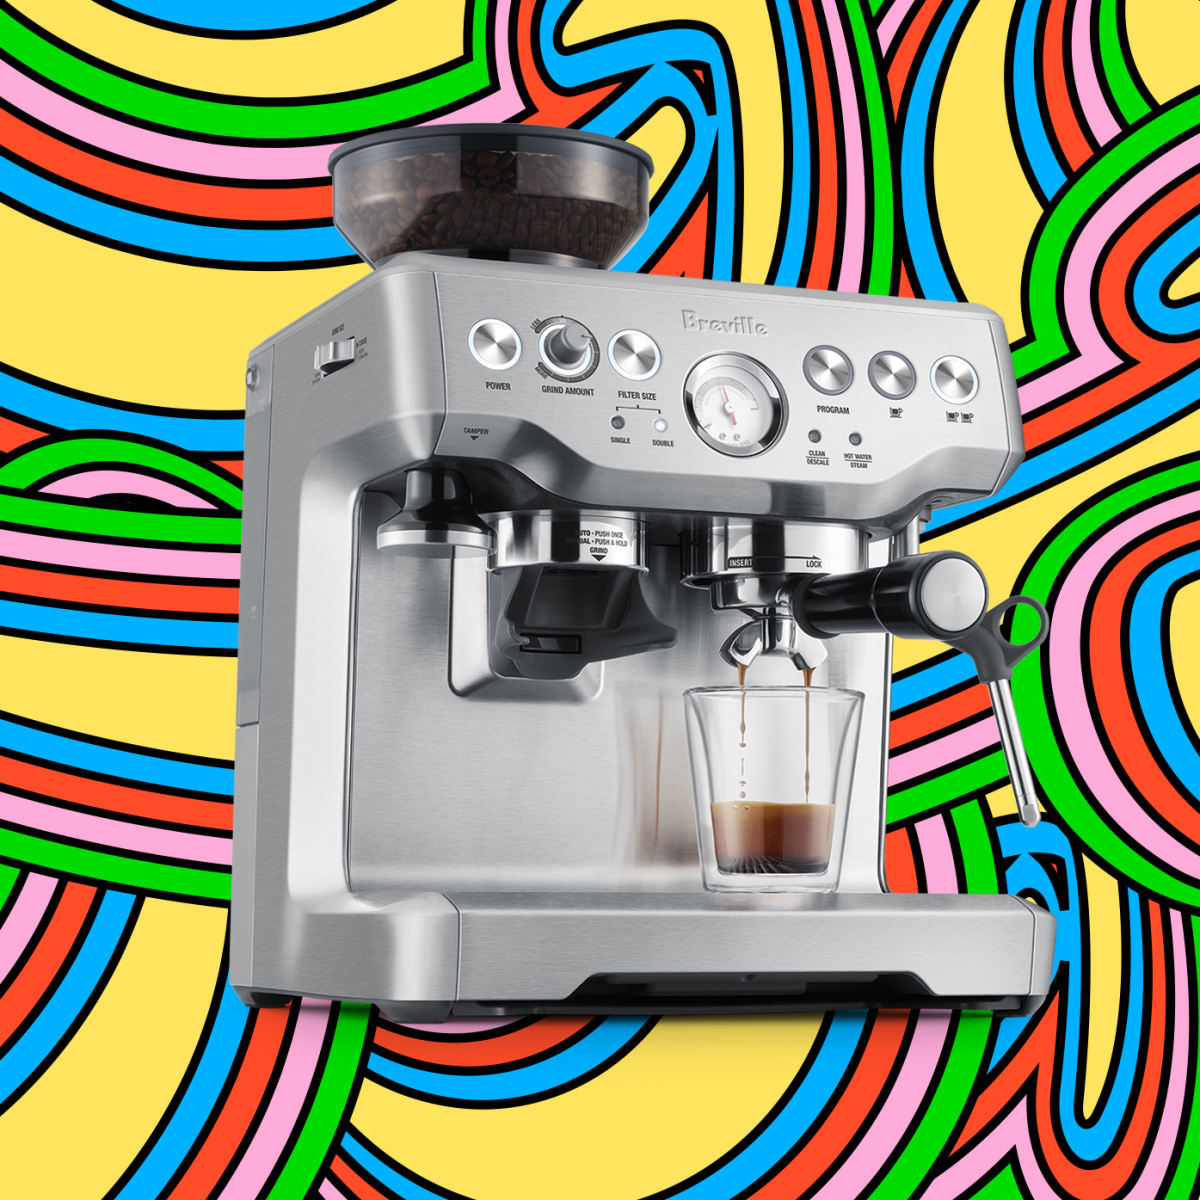 Celebrate Prime Day With Caffeine and Coffee Deals